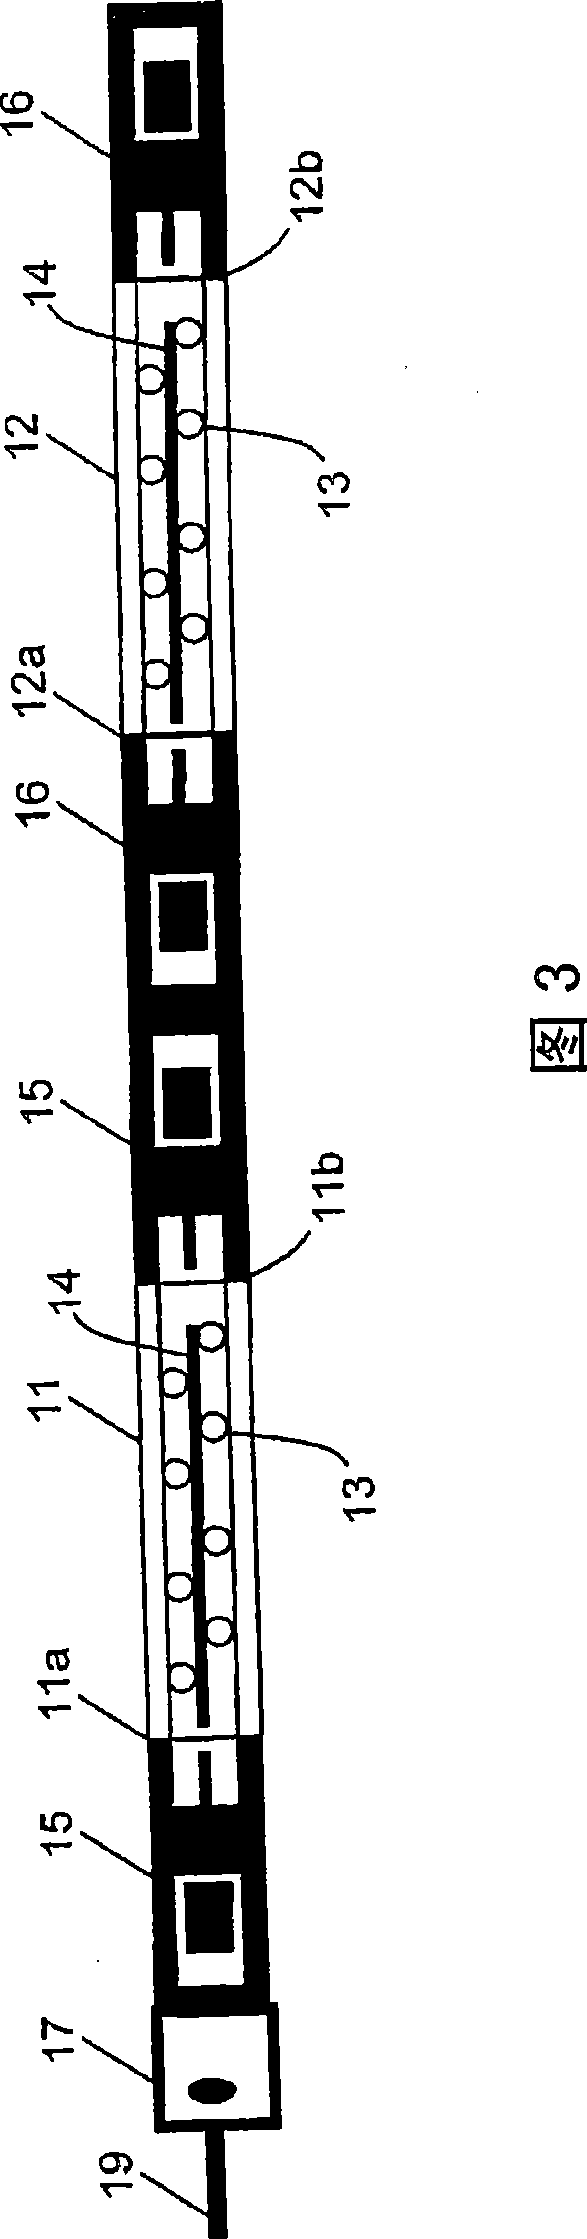 Apparatus string for use in a wellbore